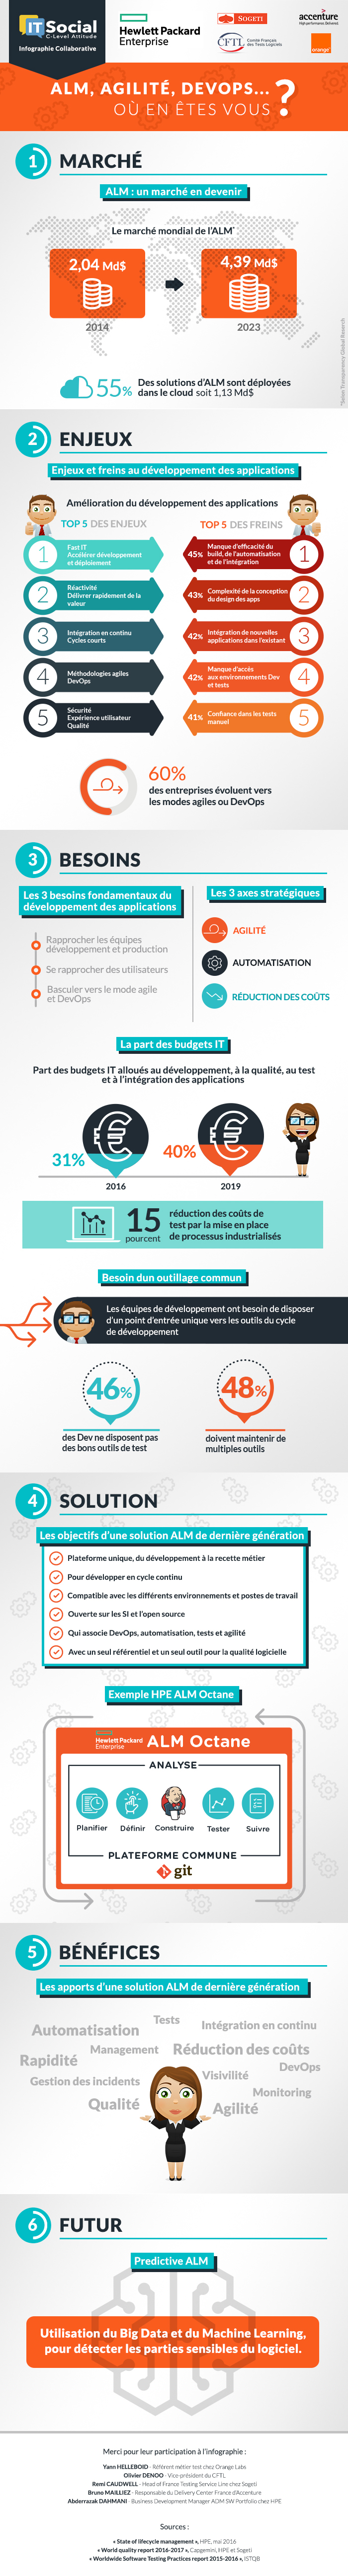 ITSOCIAL_Infographie_700-DEF